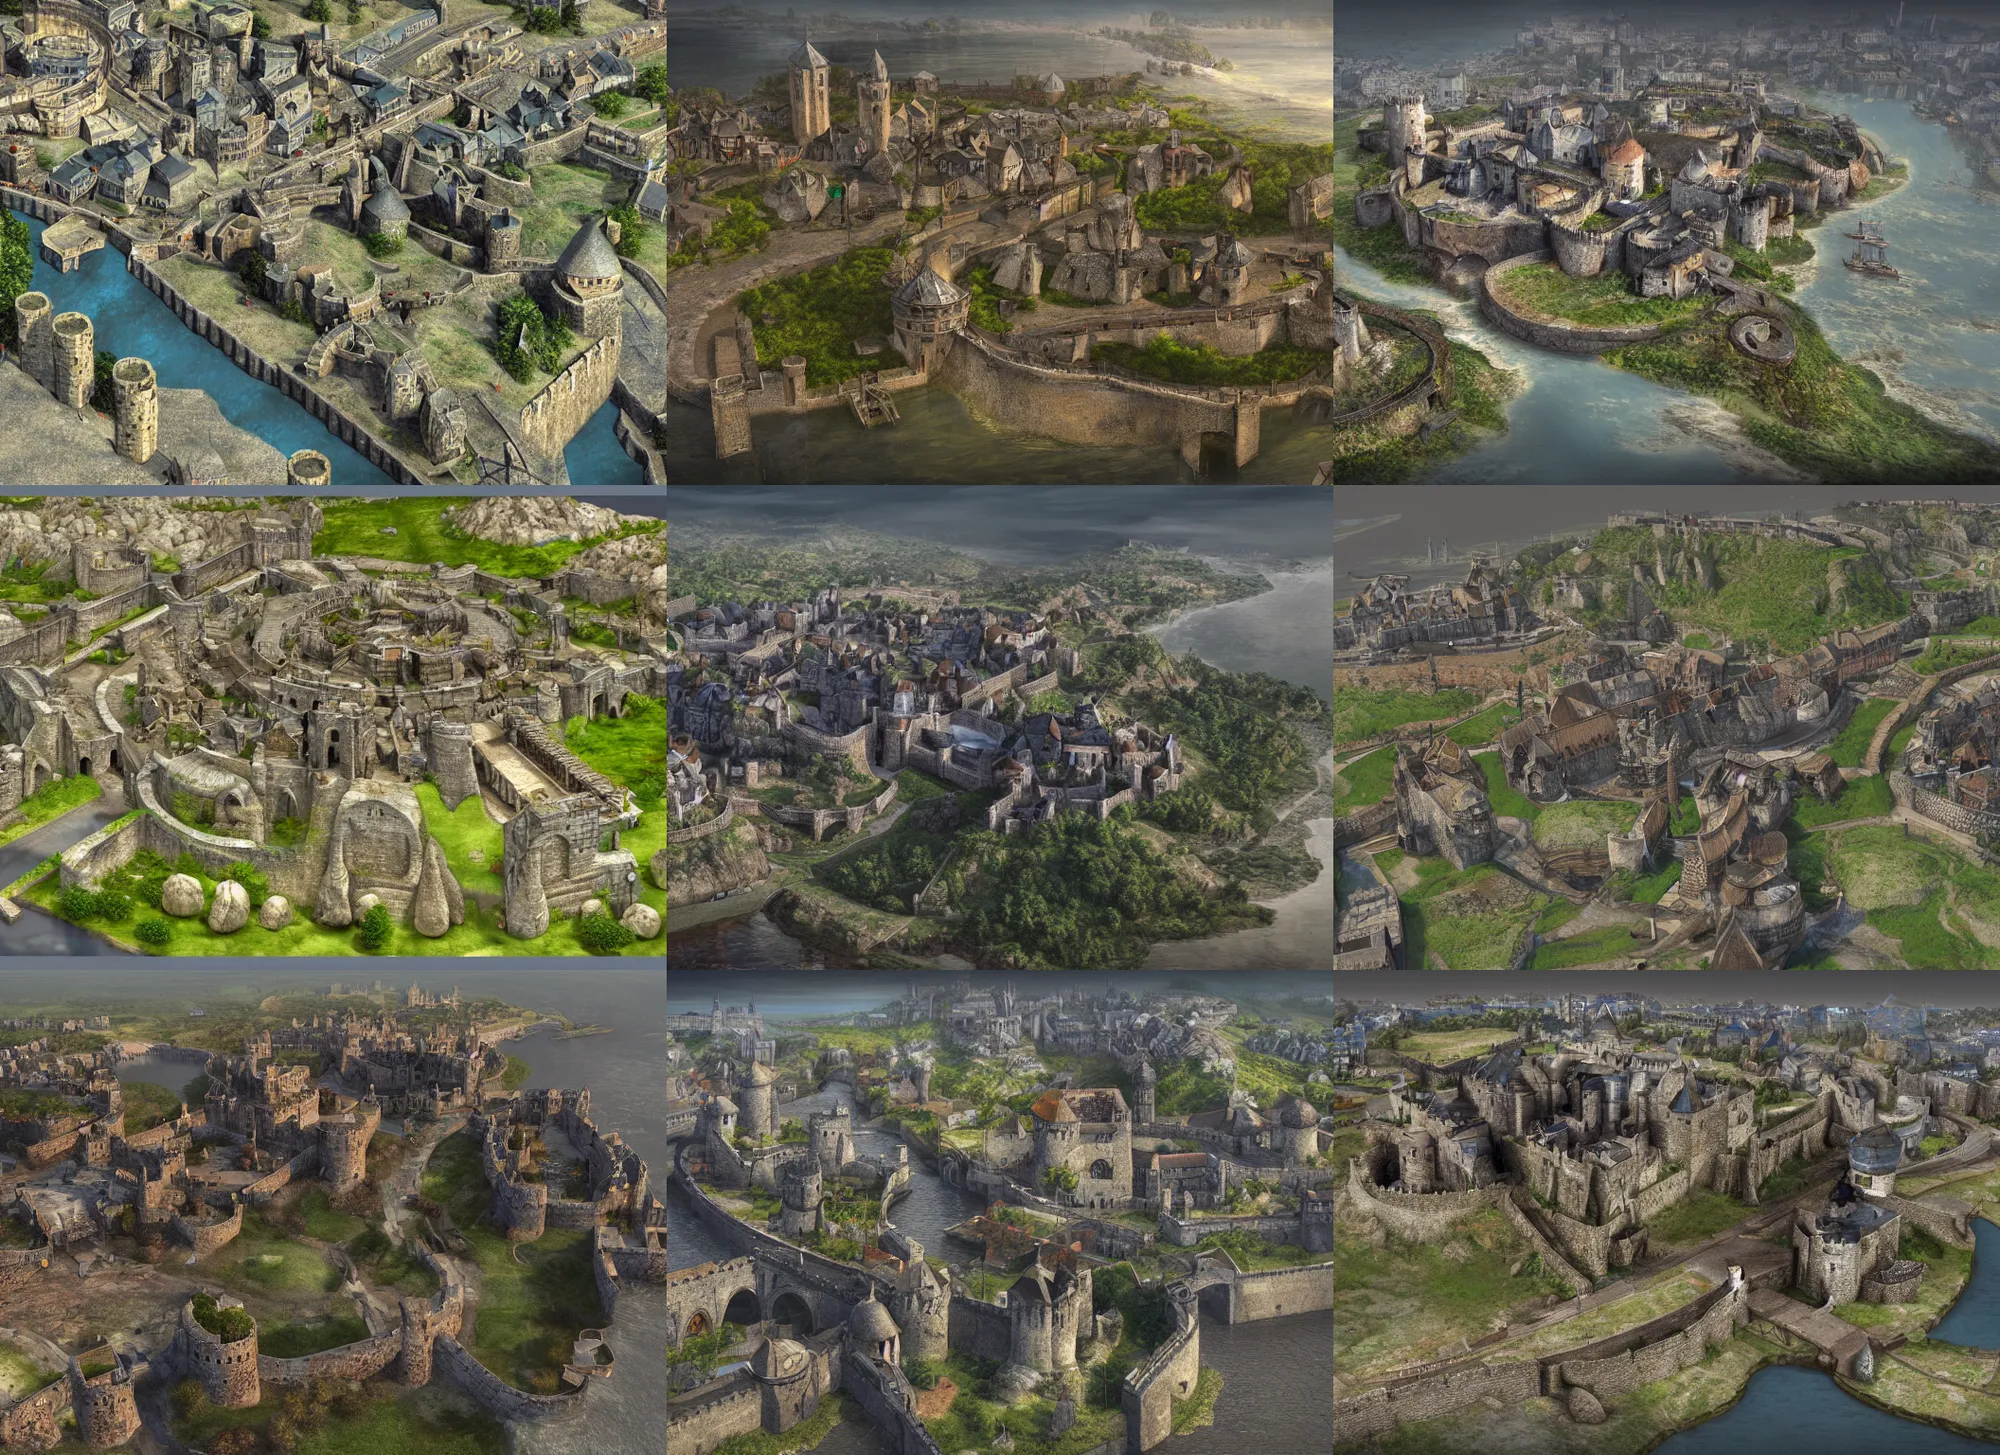 The Fortified Medieval Town - The Game